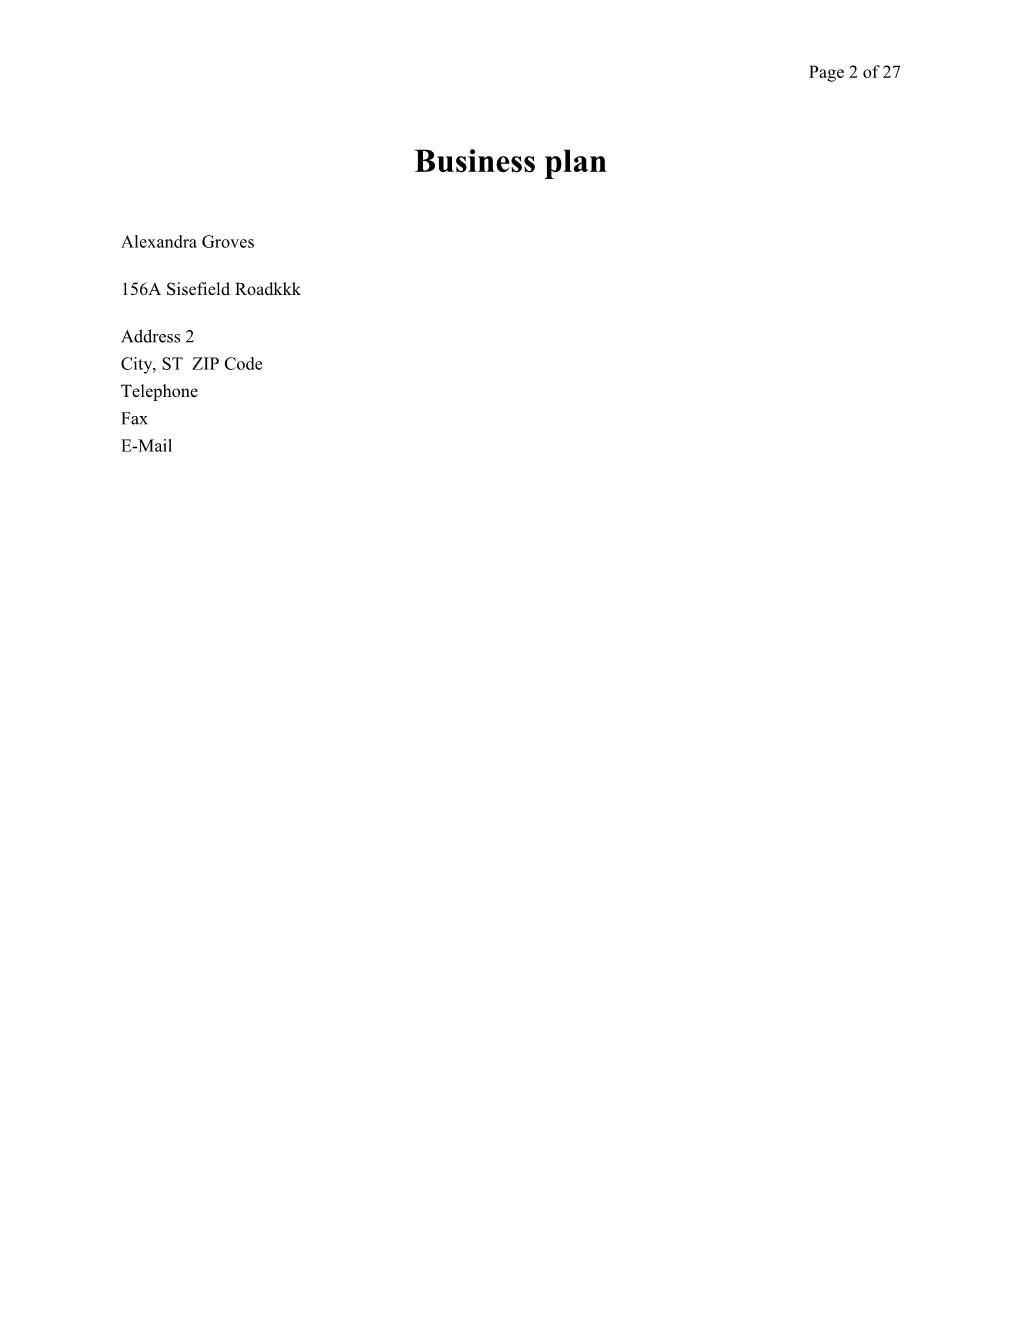 Business Plan for a Startup Business s1